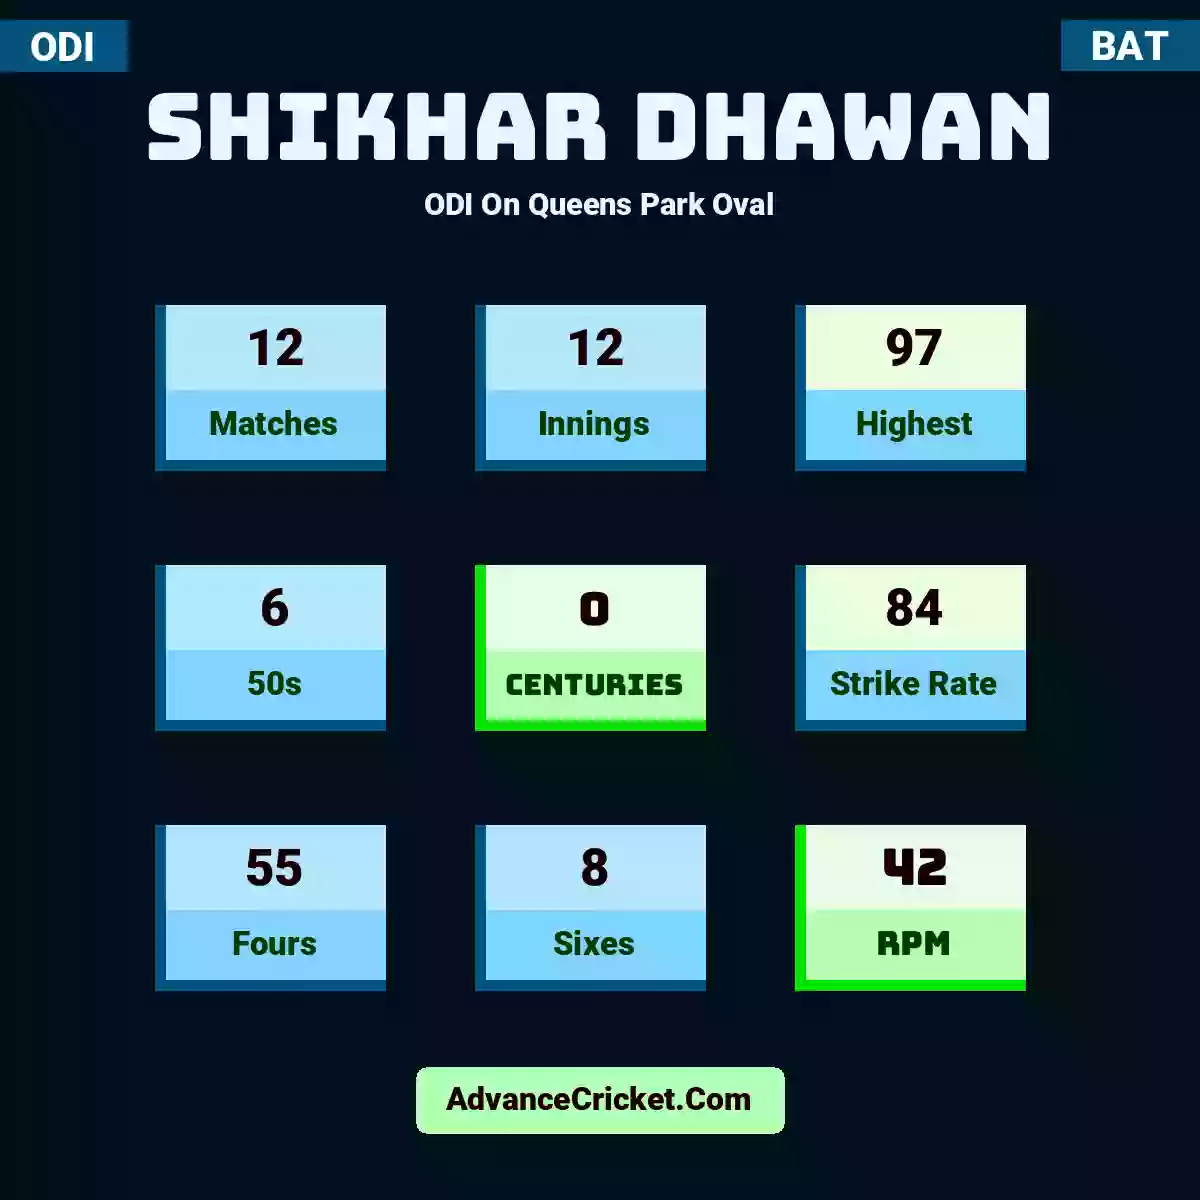 Shikhar Dhawan ODI  On Queens Park Oval, Shikhar Dhawan played 12 matches, scored 97 runs as highest, 6 half-centuries, and 0 centuries, with a strike rate of 84. S.Dhawan hit 55 fours and 8 sixes, with an RPM of 42.